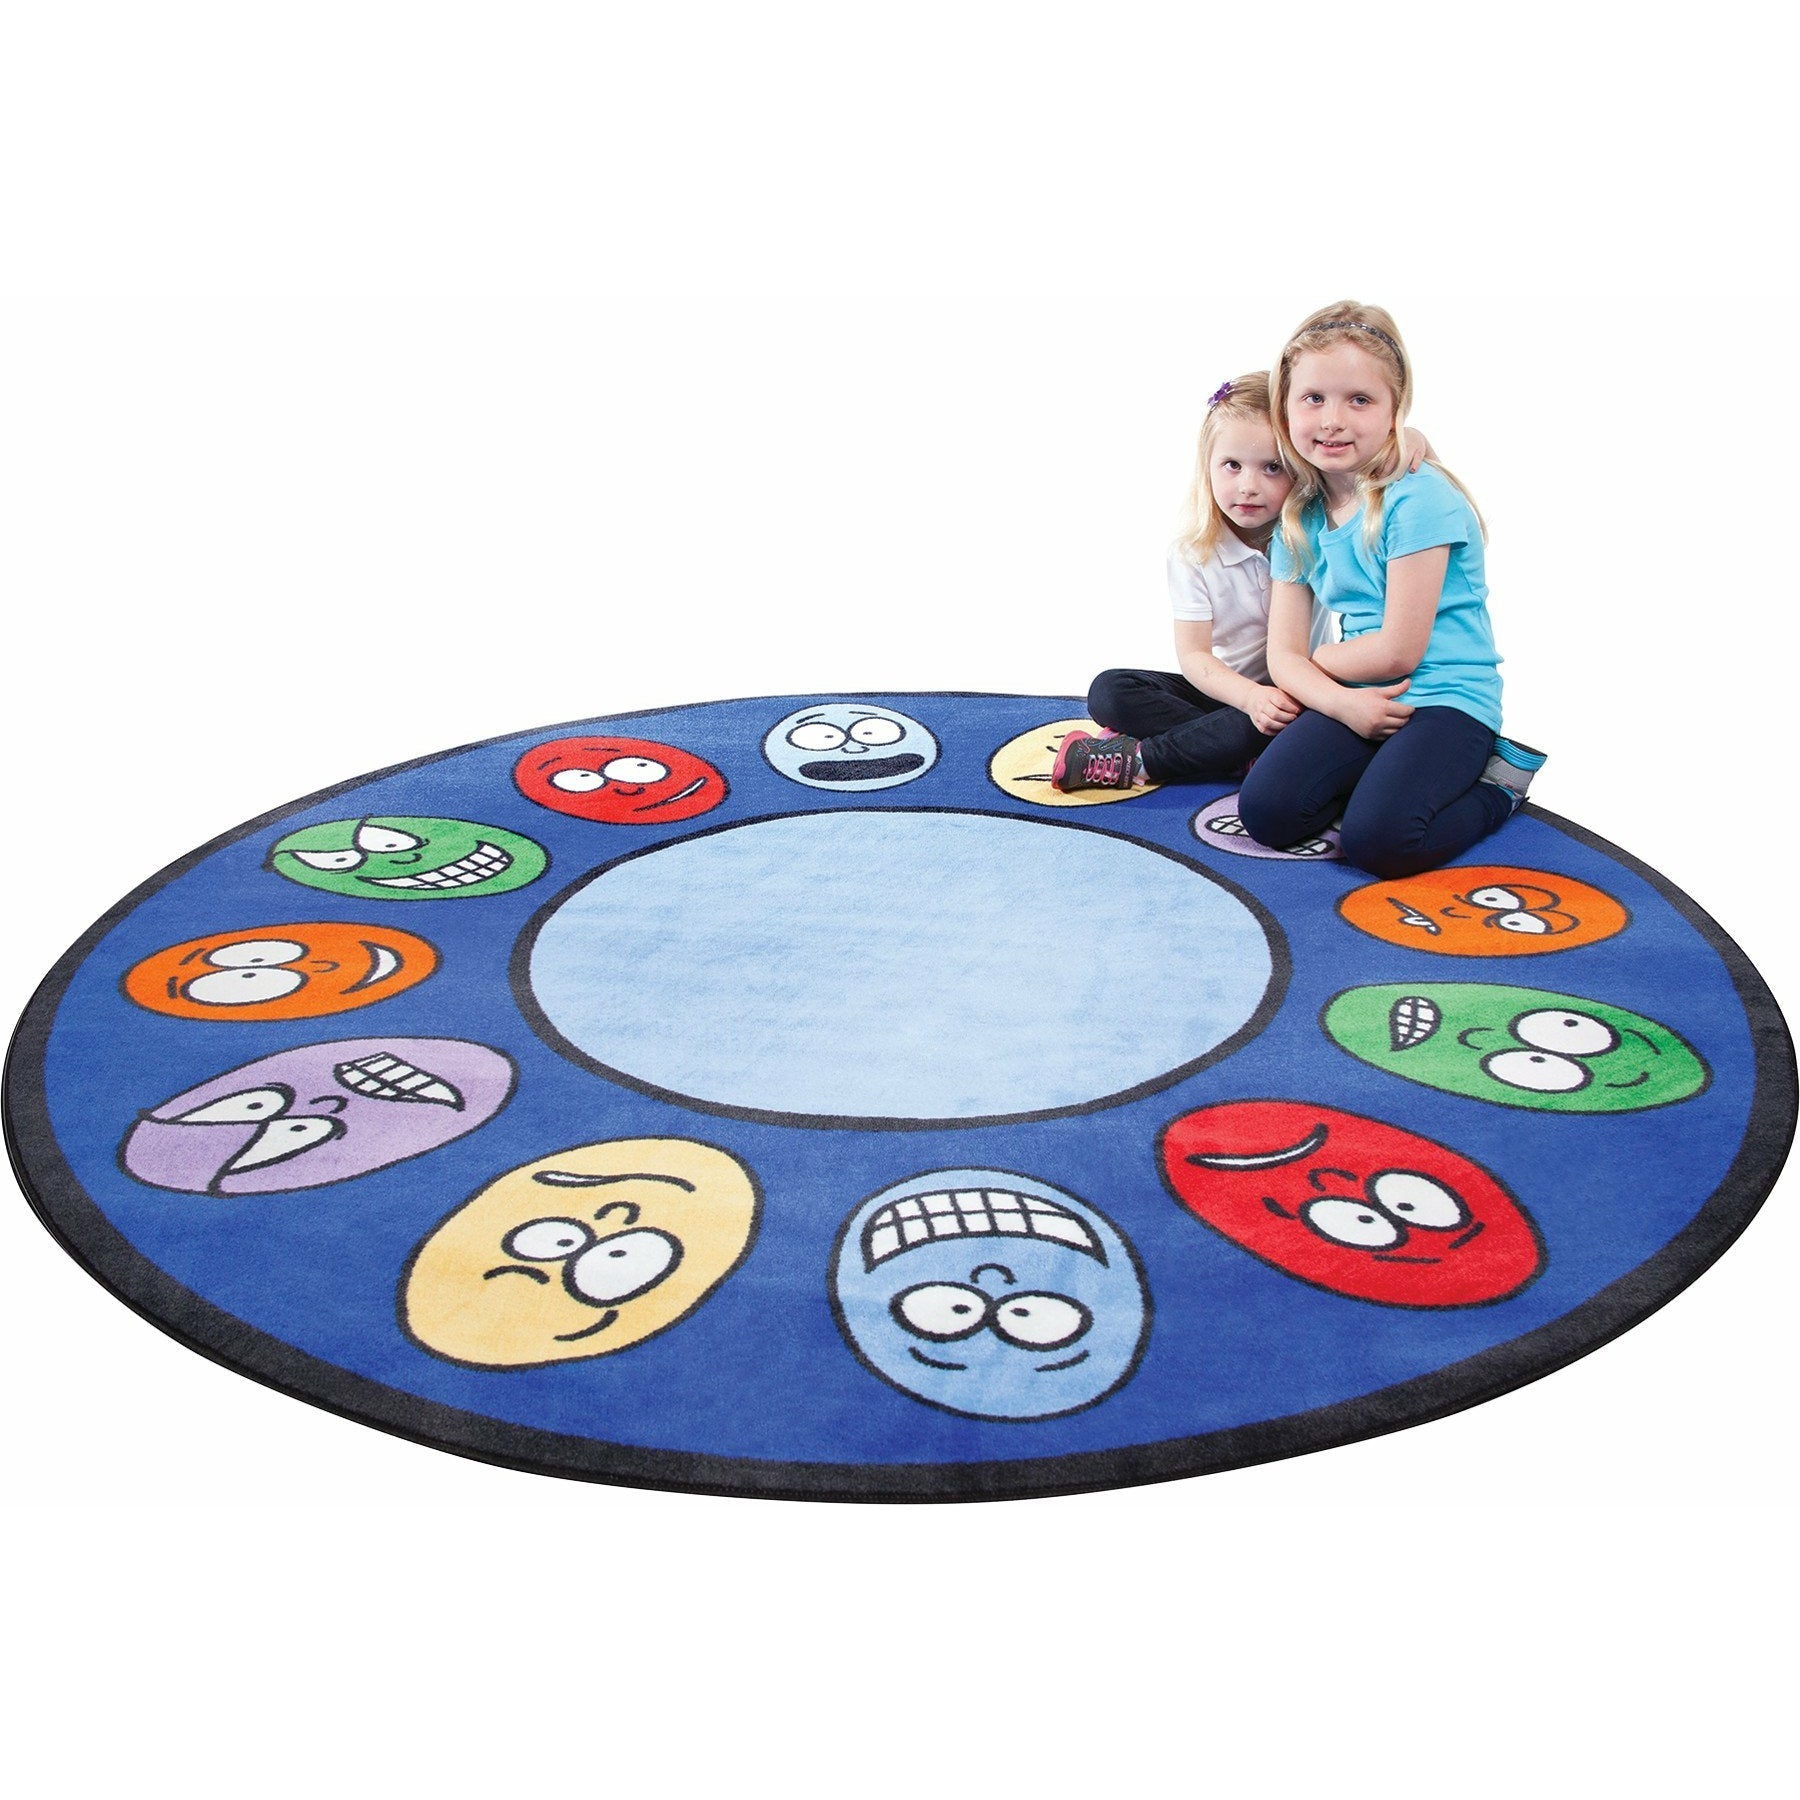 Expressions Educational Rug, 6'6" Round